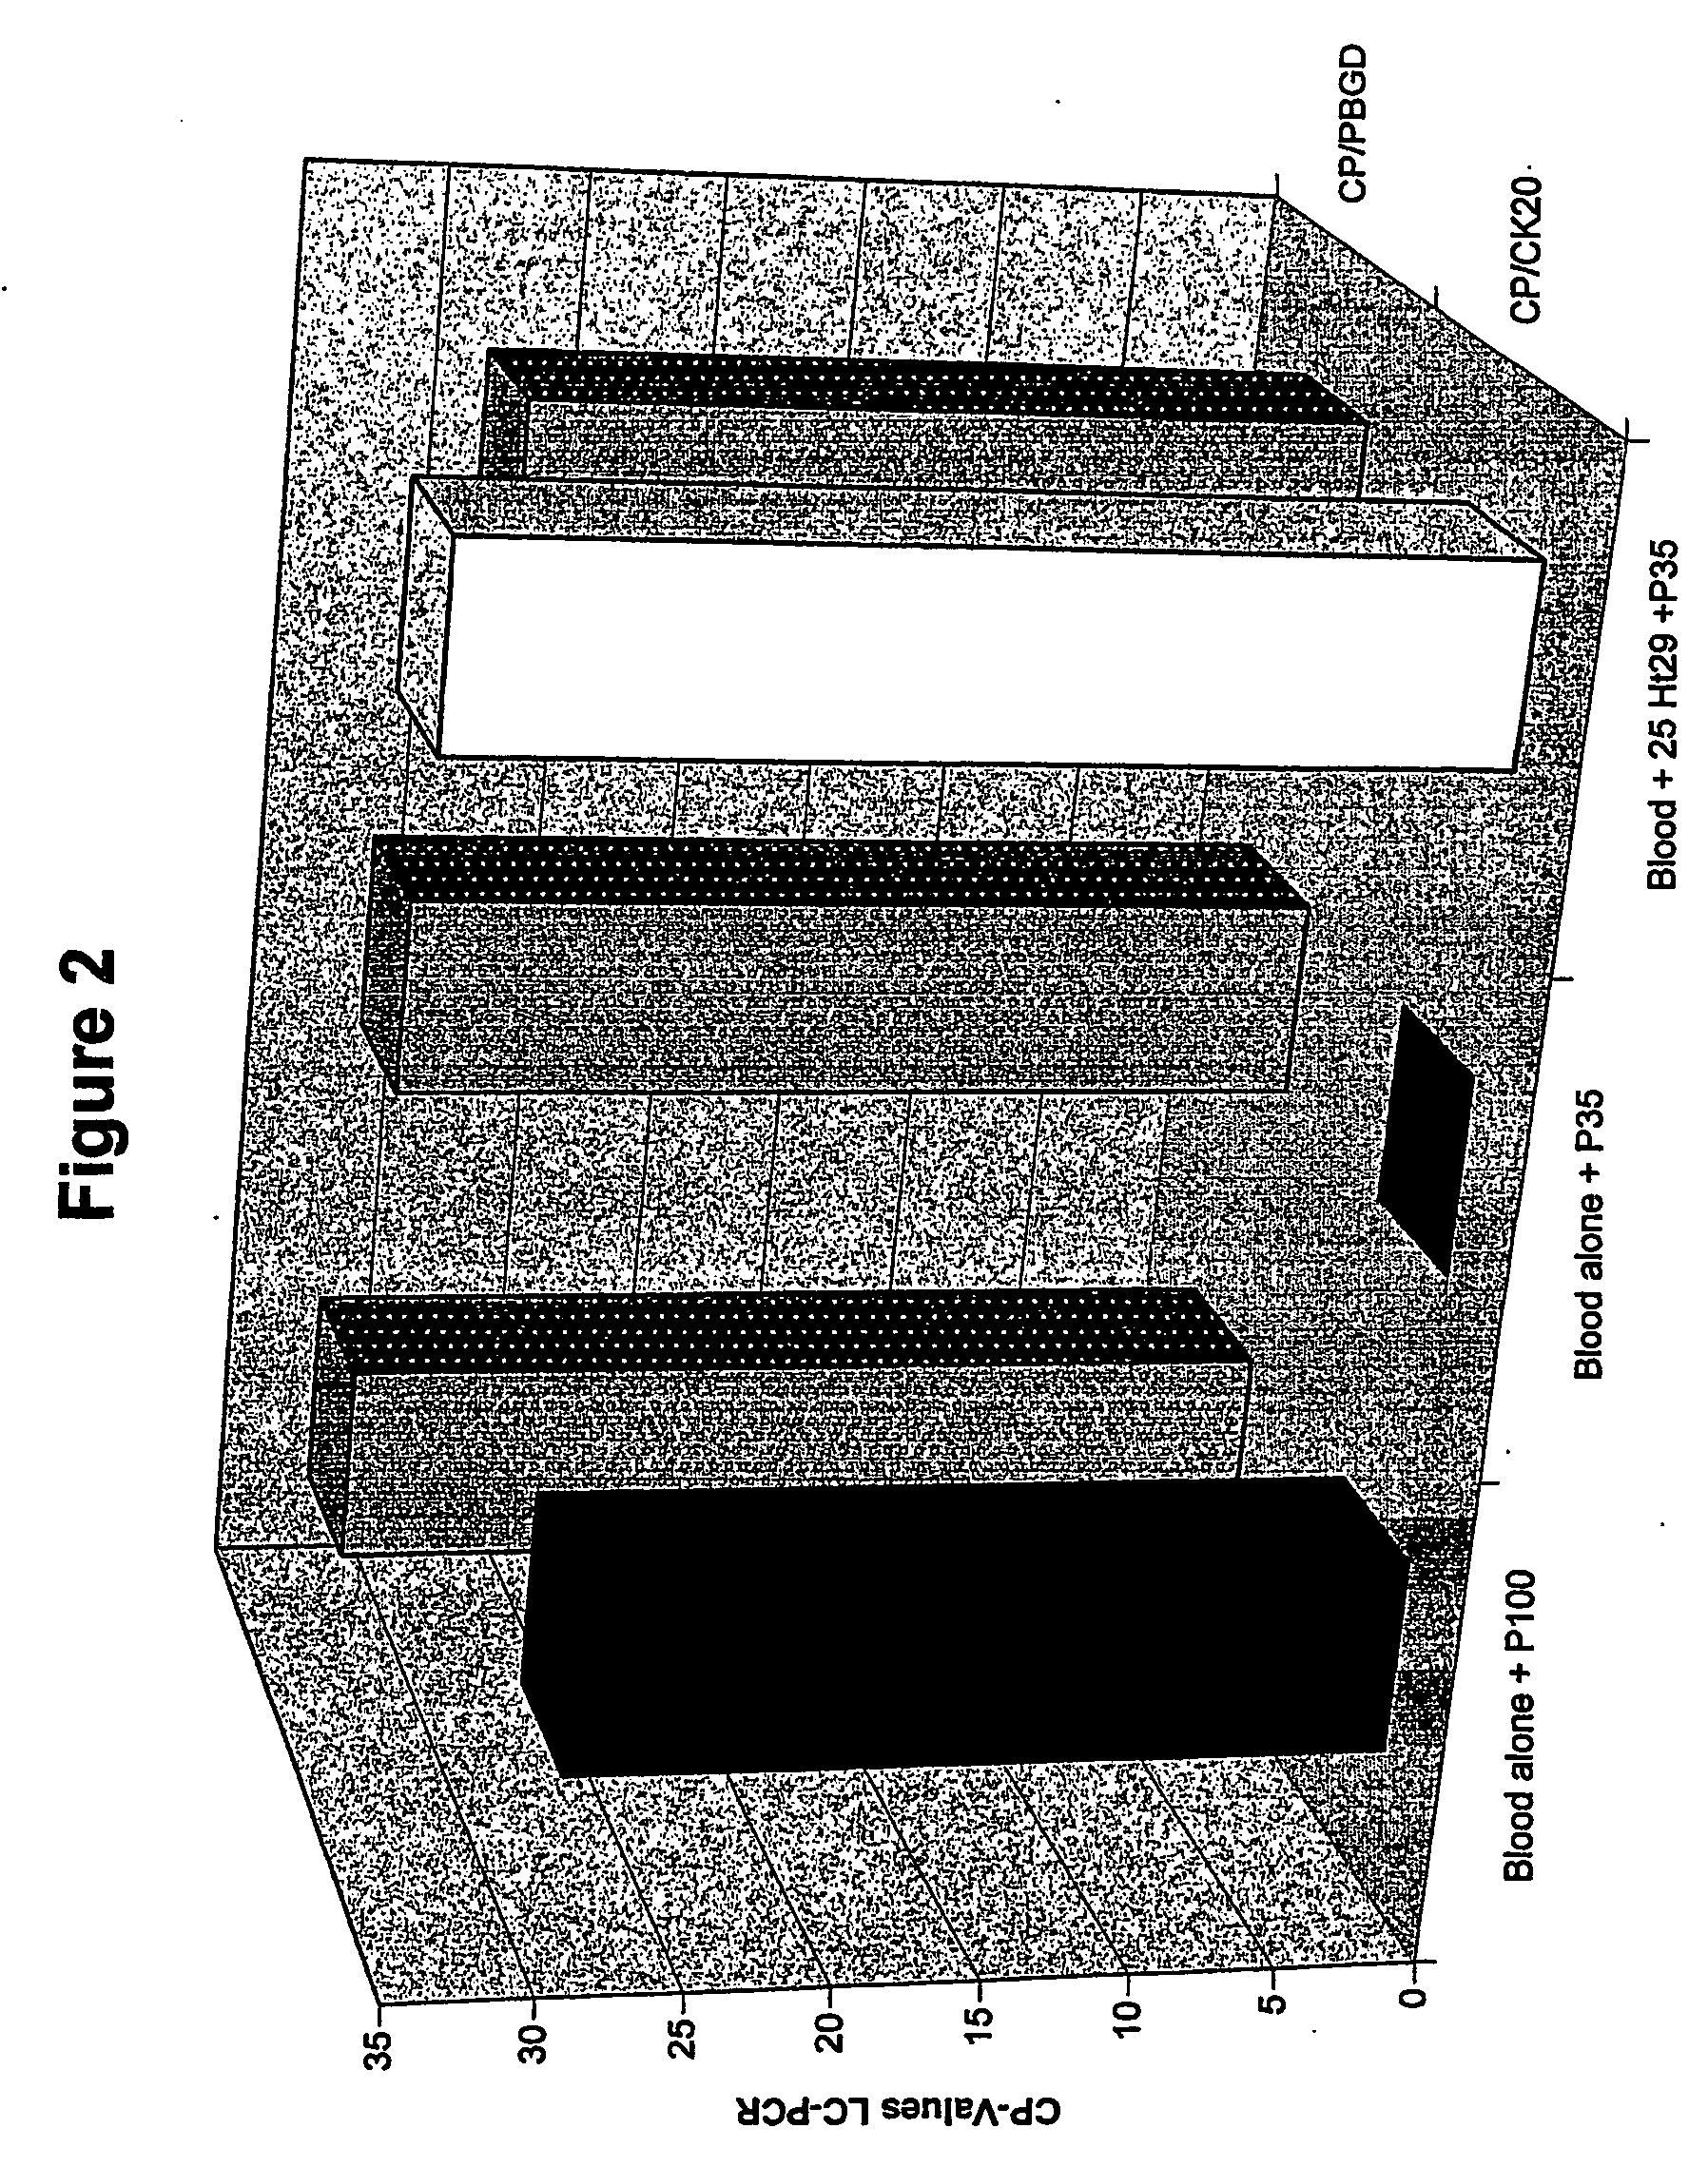 Method for the separation of cell fractions